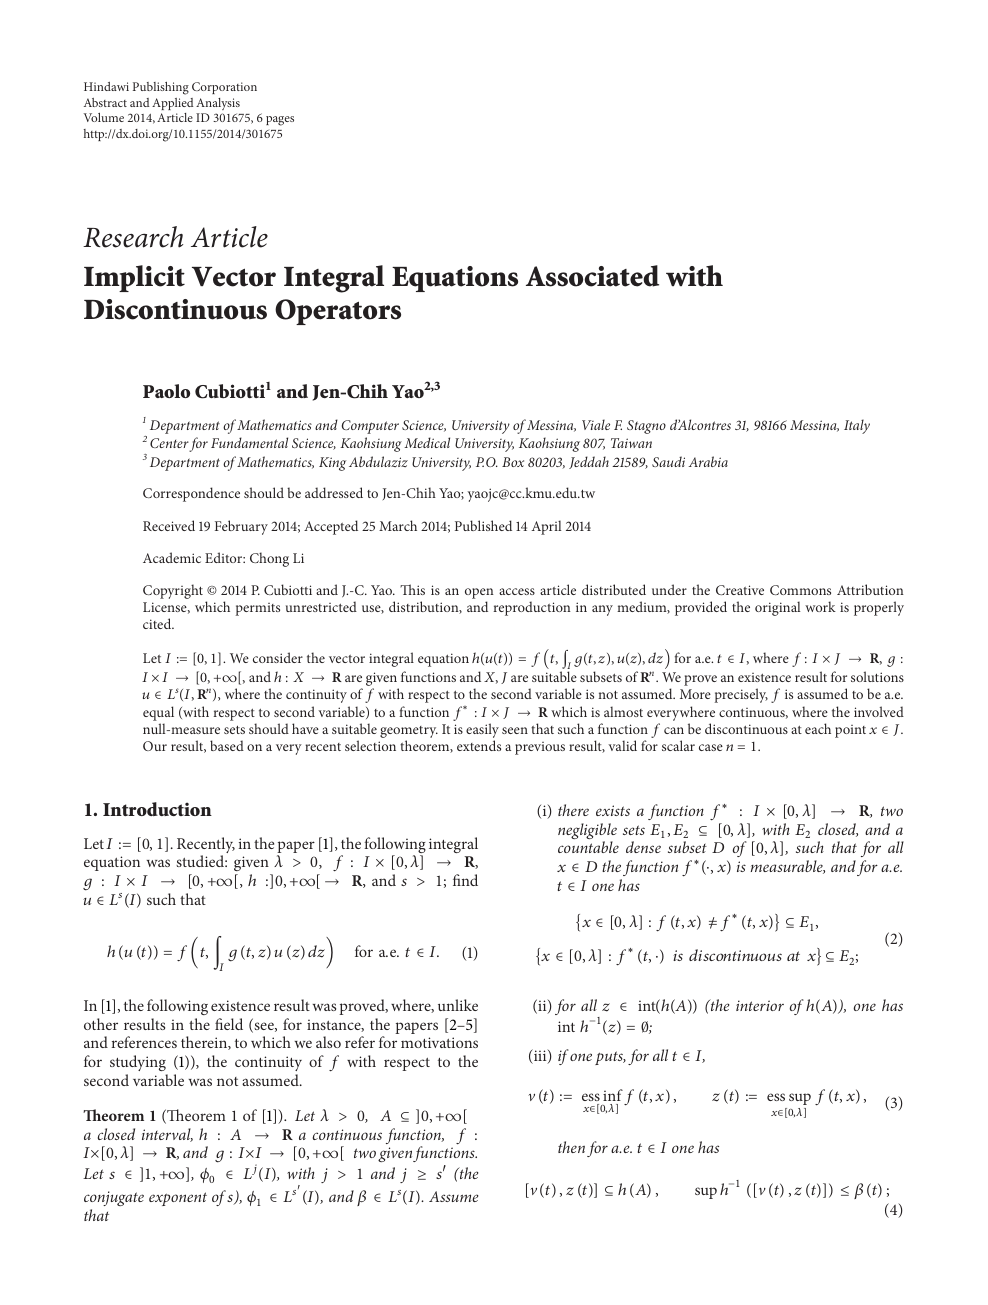 Implicit Vector Integral Equations Associated With Discontinuous Operators Topic Of Research Paper In Mathematics Download Scholarly Article Pdf And Read For Free On Cyberleninka Open Science Hub